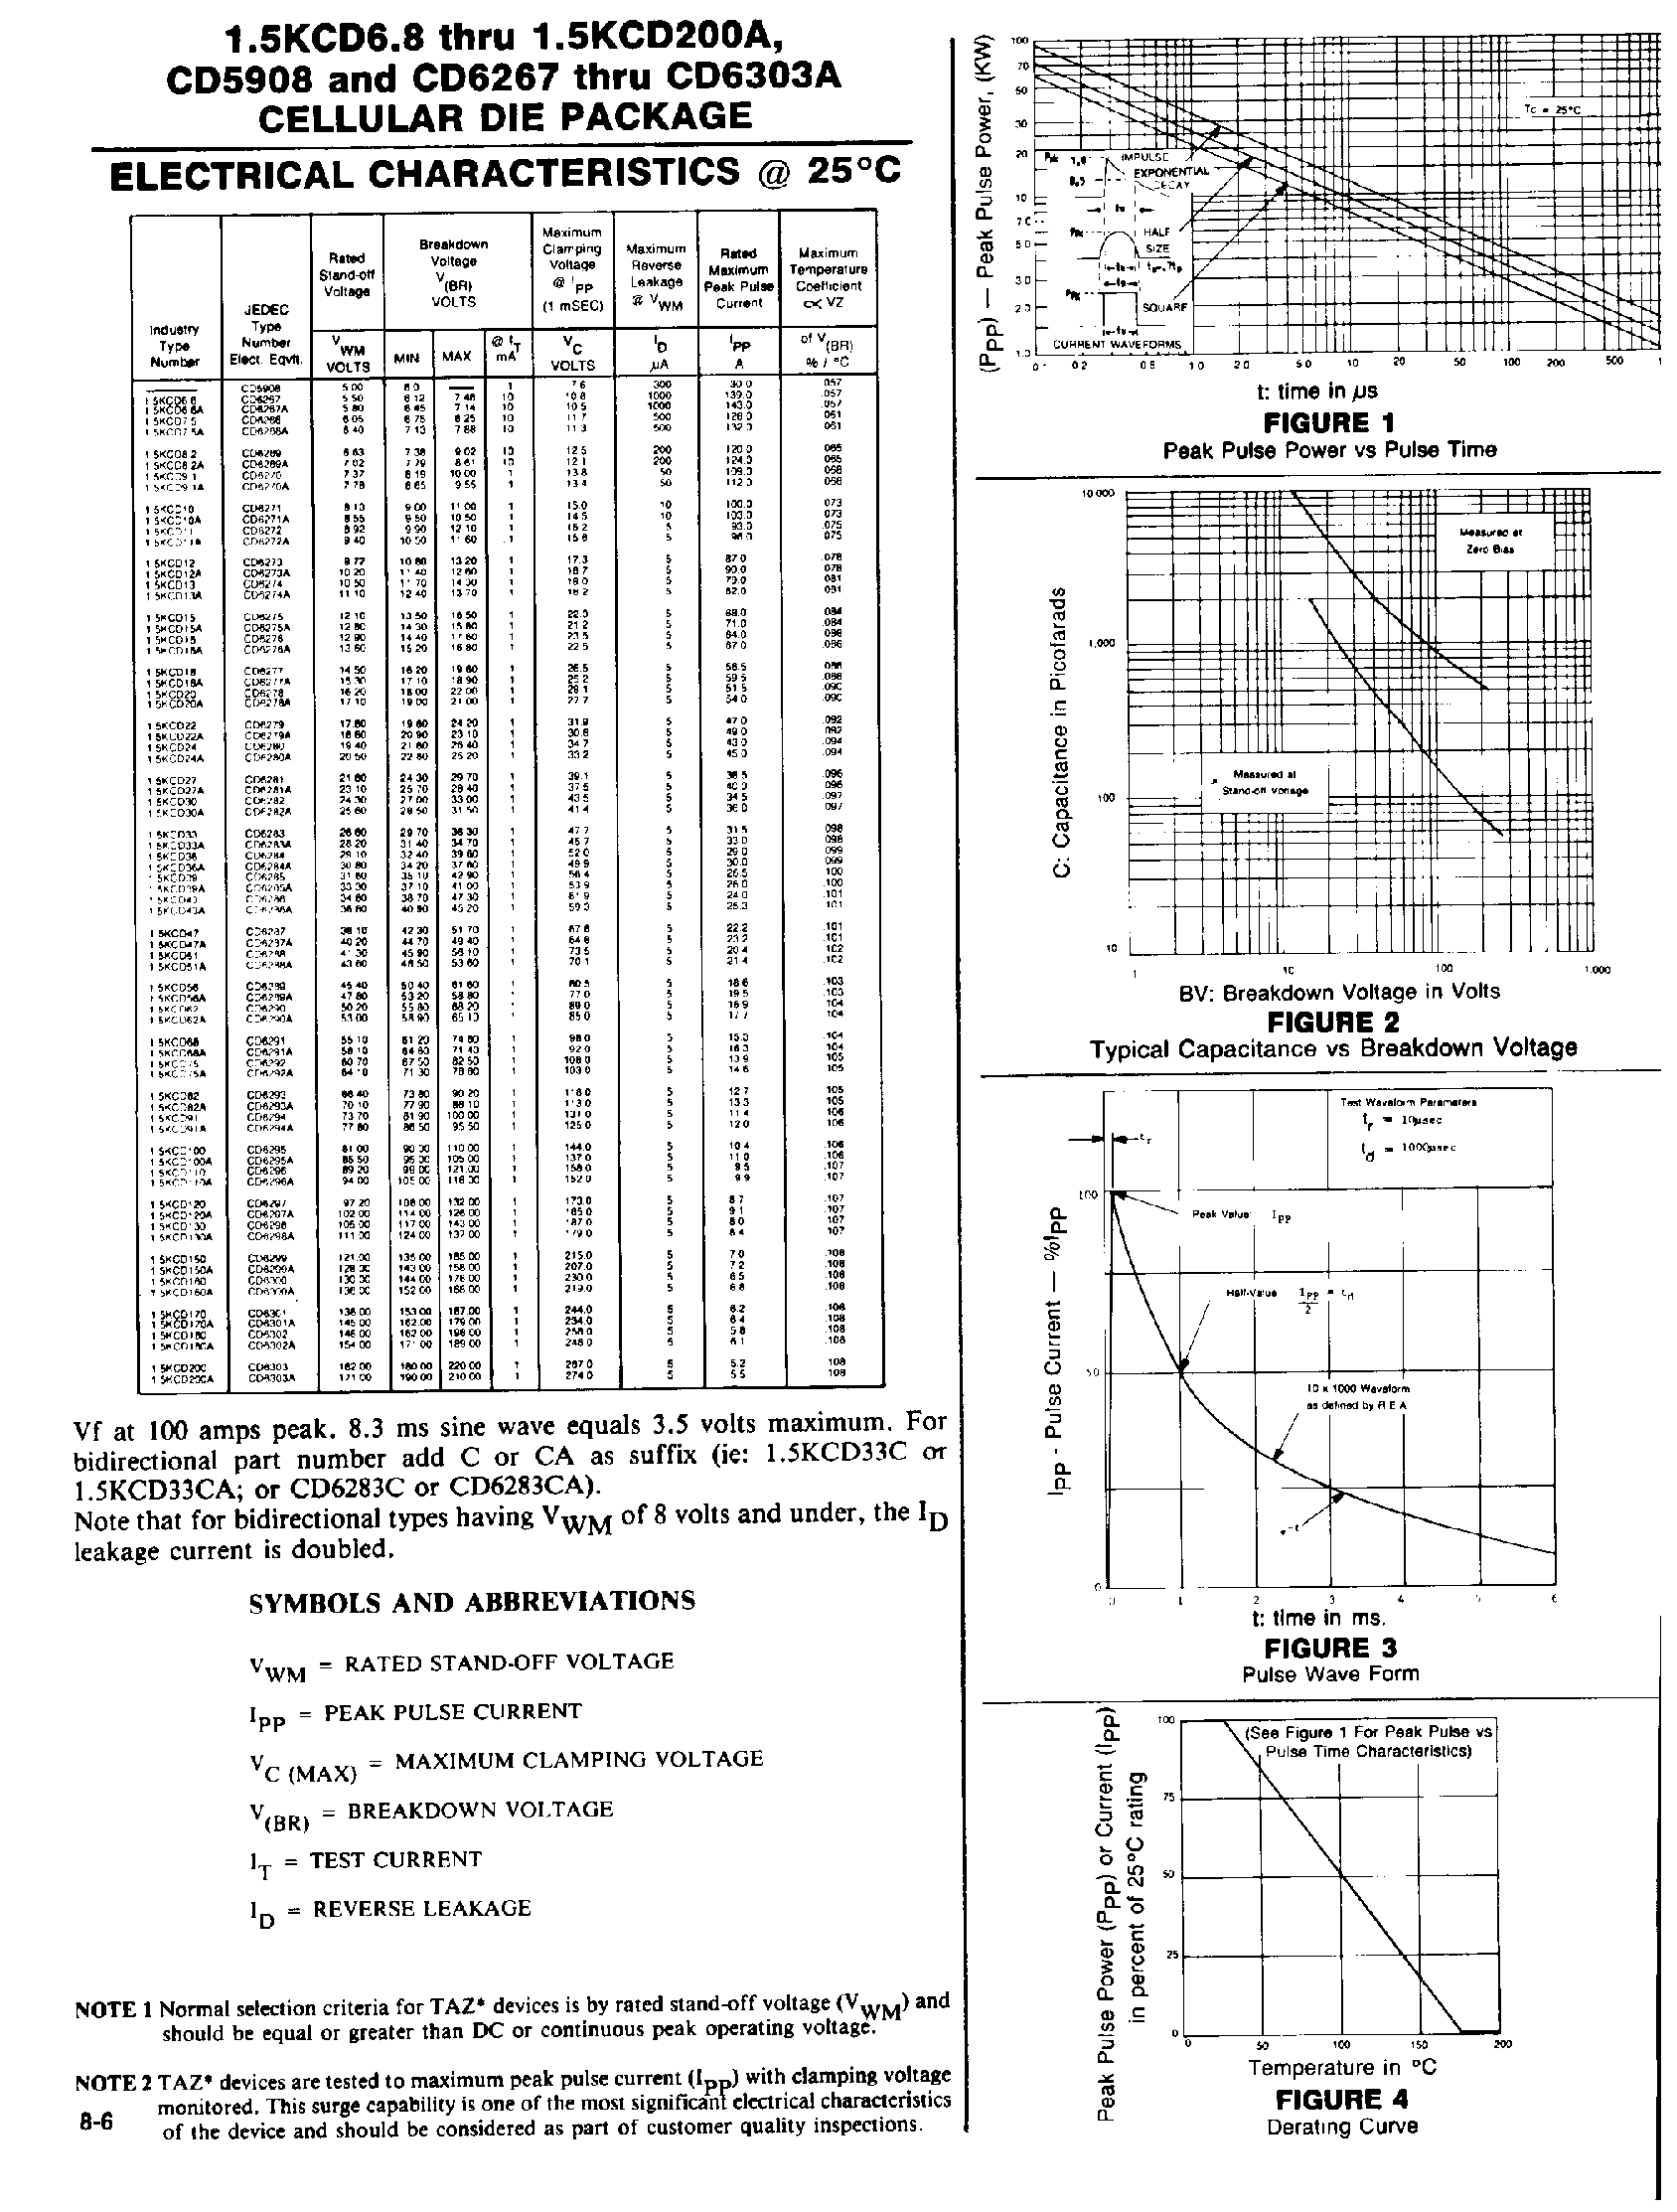 Datasheet CD6278A - Transient suppressor CELLULAR DIE PACKAGE page 2